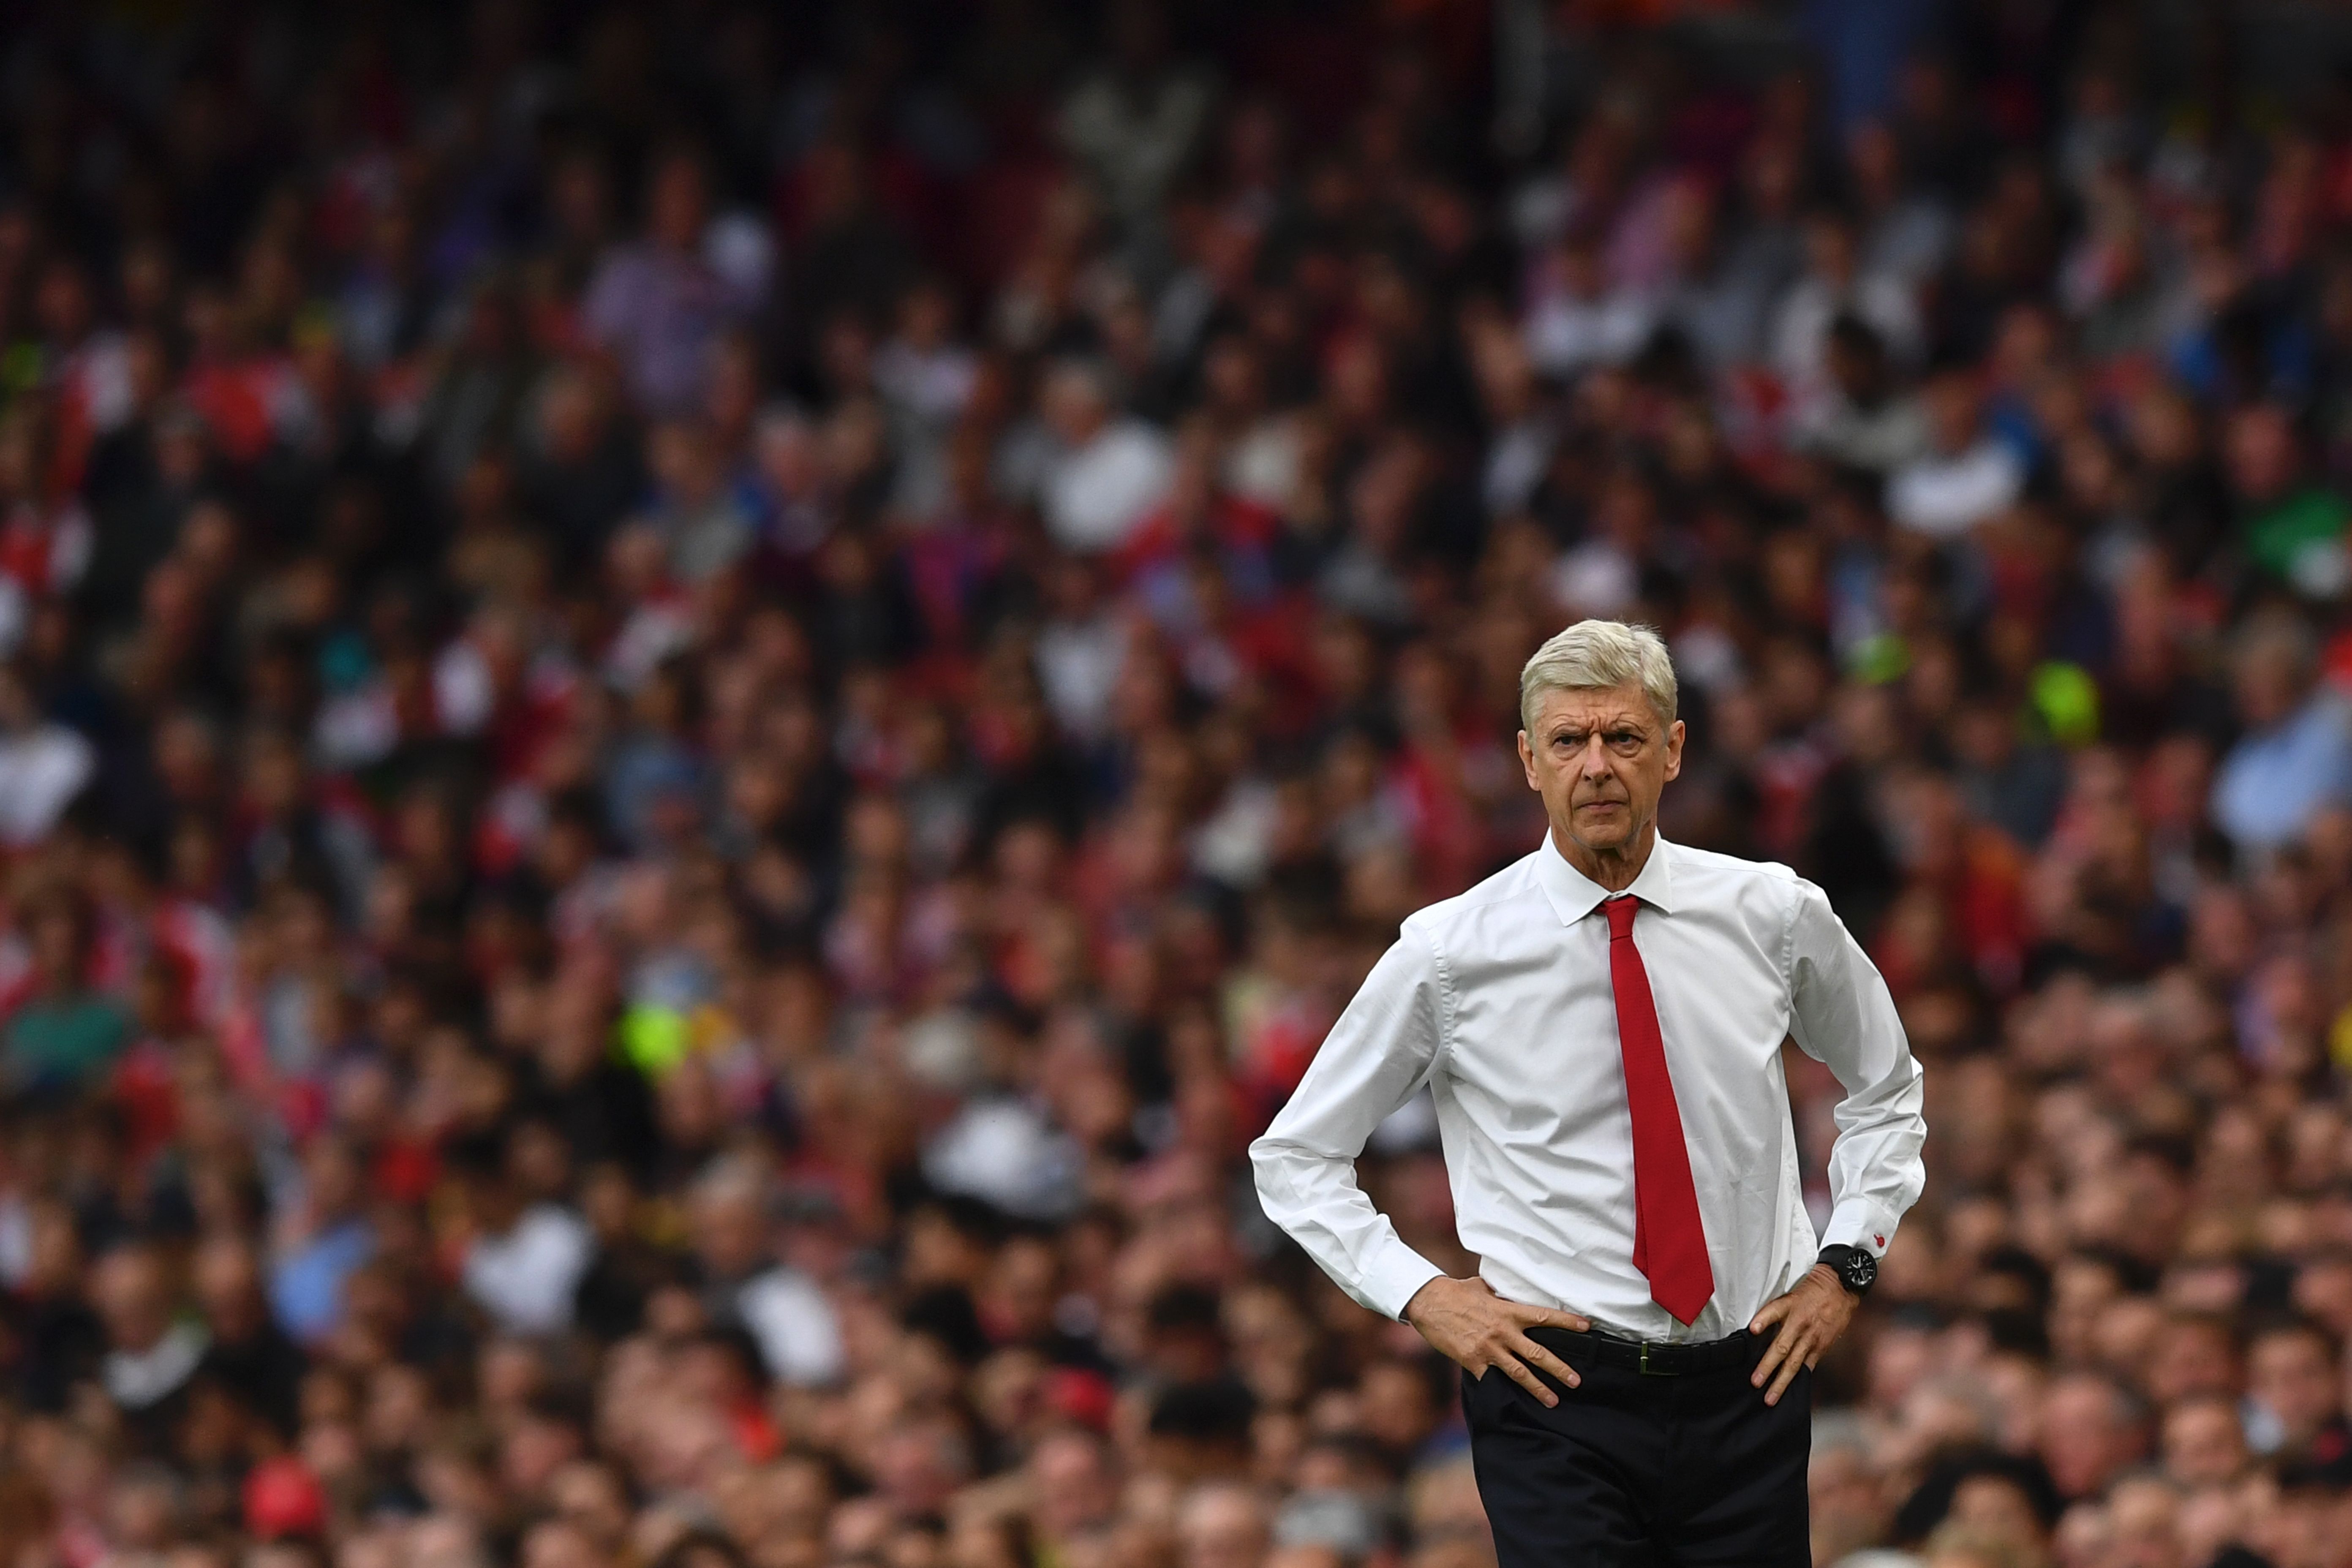 Arsenal's French manager Arsene Wenger looks on from the touchline during the English Premier League football match between Arsenal and Chelsea at the Emirates Stadium in London on September 24, 2016.  / AFP / Ben STANSALL / RESTRICTED TO EDITORIAL USE. No use with unauthorized audio, video, data, fixture lists, club/league logos or 'live' services. Online in-match use limited to 75 images, no video emulation. No use in betting, games or single club/league/player publications.  /         (Photo credit should read BEN STANSALL/AFP/Getty Images)